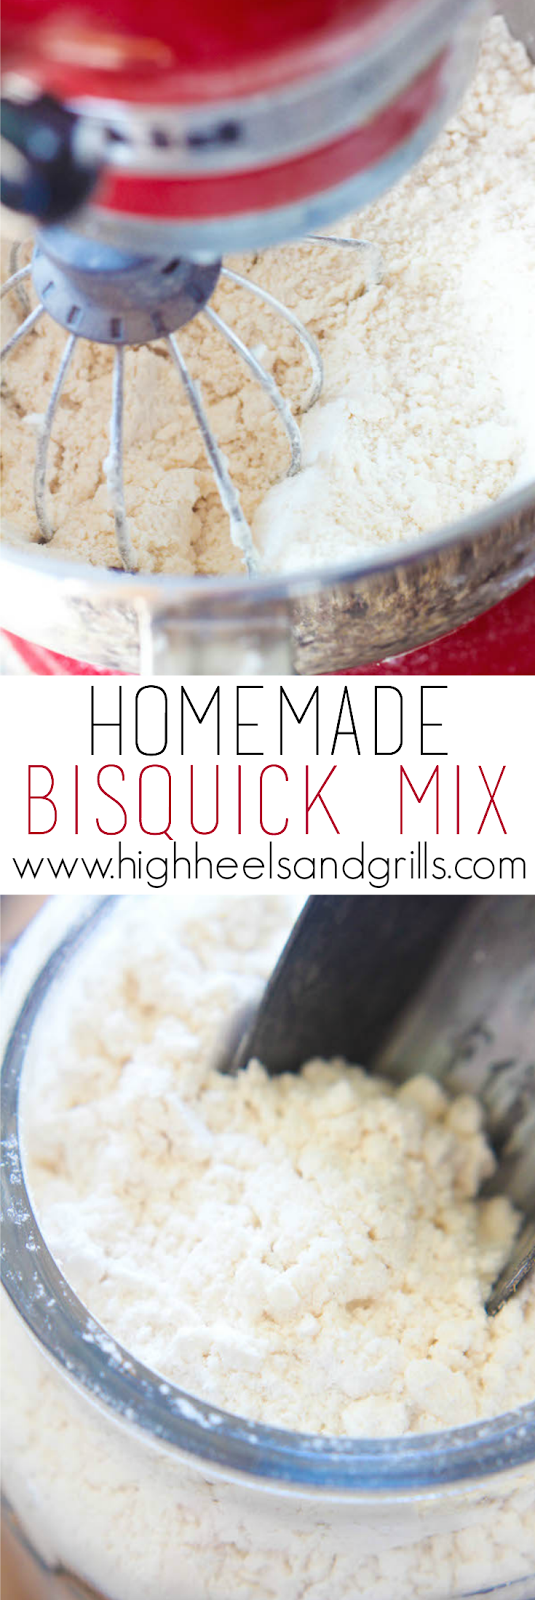 Homemade Bisquick Mix - I cannot believe how easy this is to make and it tastes just like the real thing! It only requires 4 ingredients and can be substituted in any recipe that calls for Bisquick. https://www.highheelsandgrills.com/2015/03/homemade-bisquick-mix.html